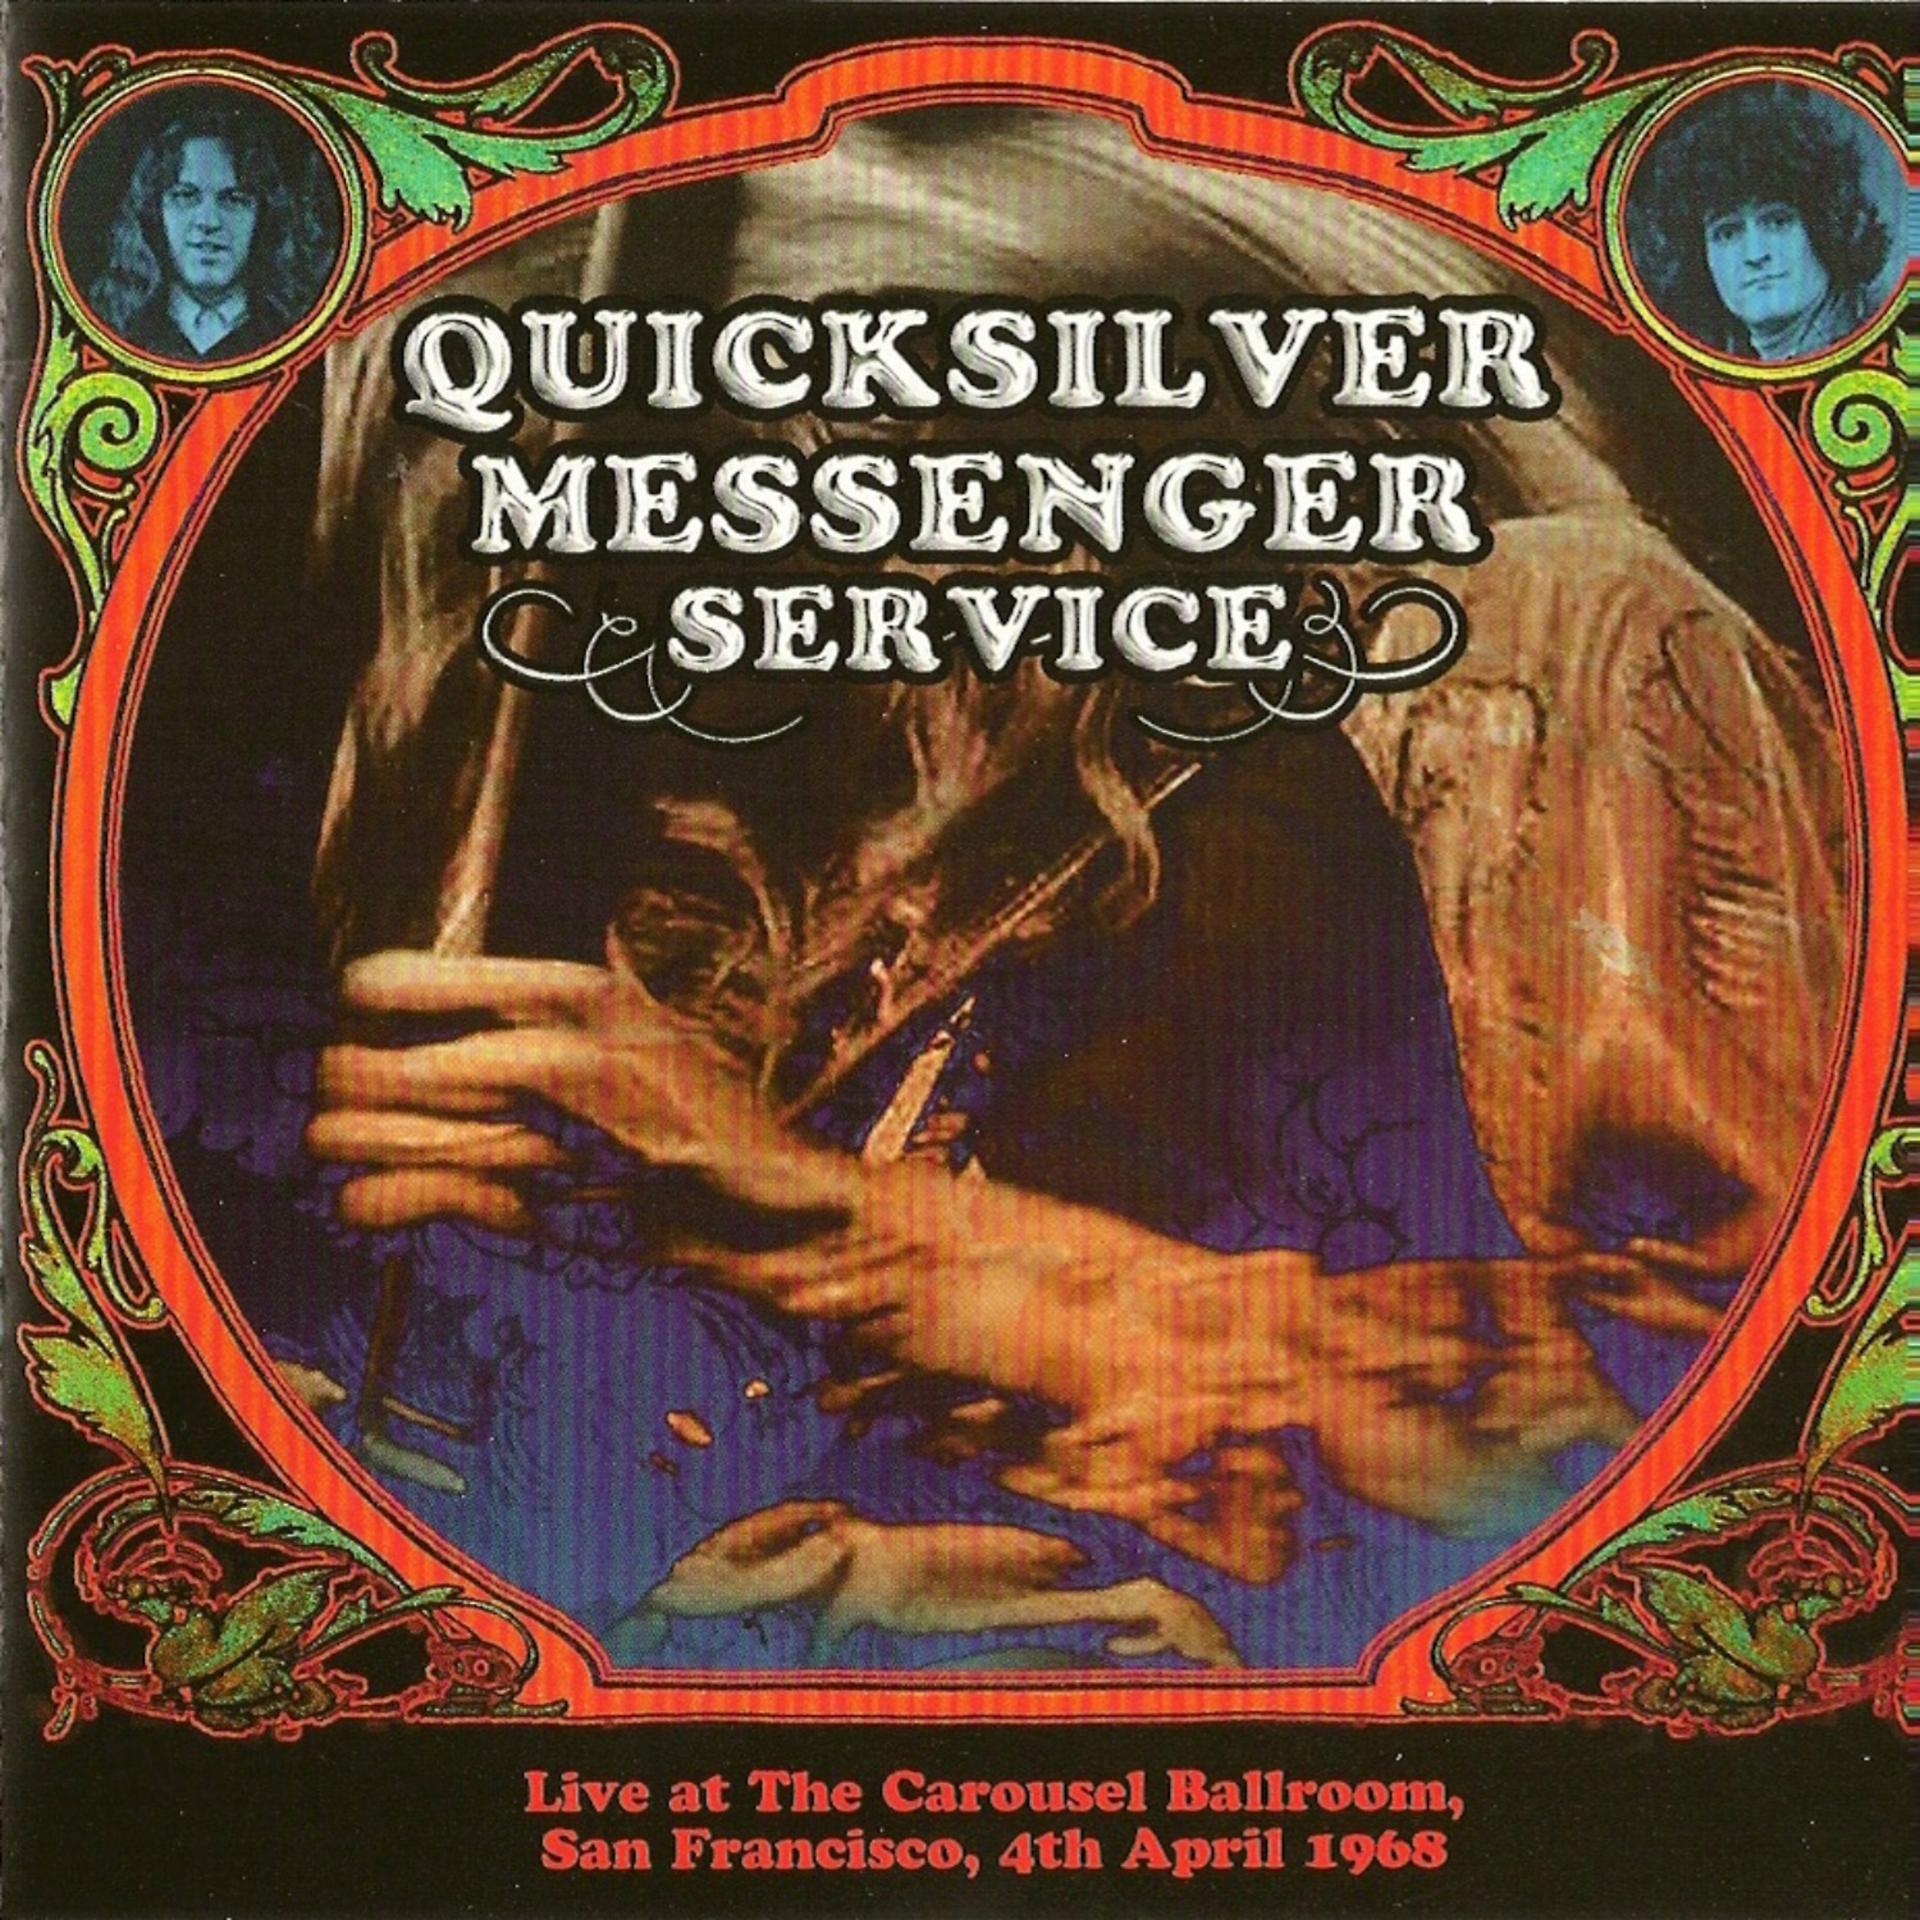 Quicksilver messenger. Quicksilver Messenger service 1968. Quicksilver Messenger service. Messenger service. At the Carousel Ballroom, April 24 1968 CD Covers.